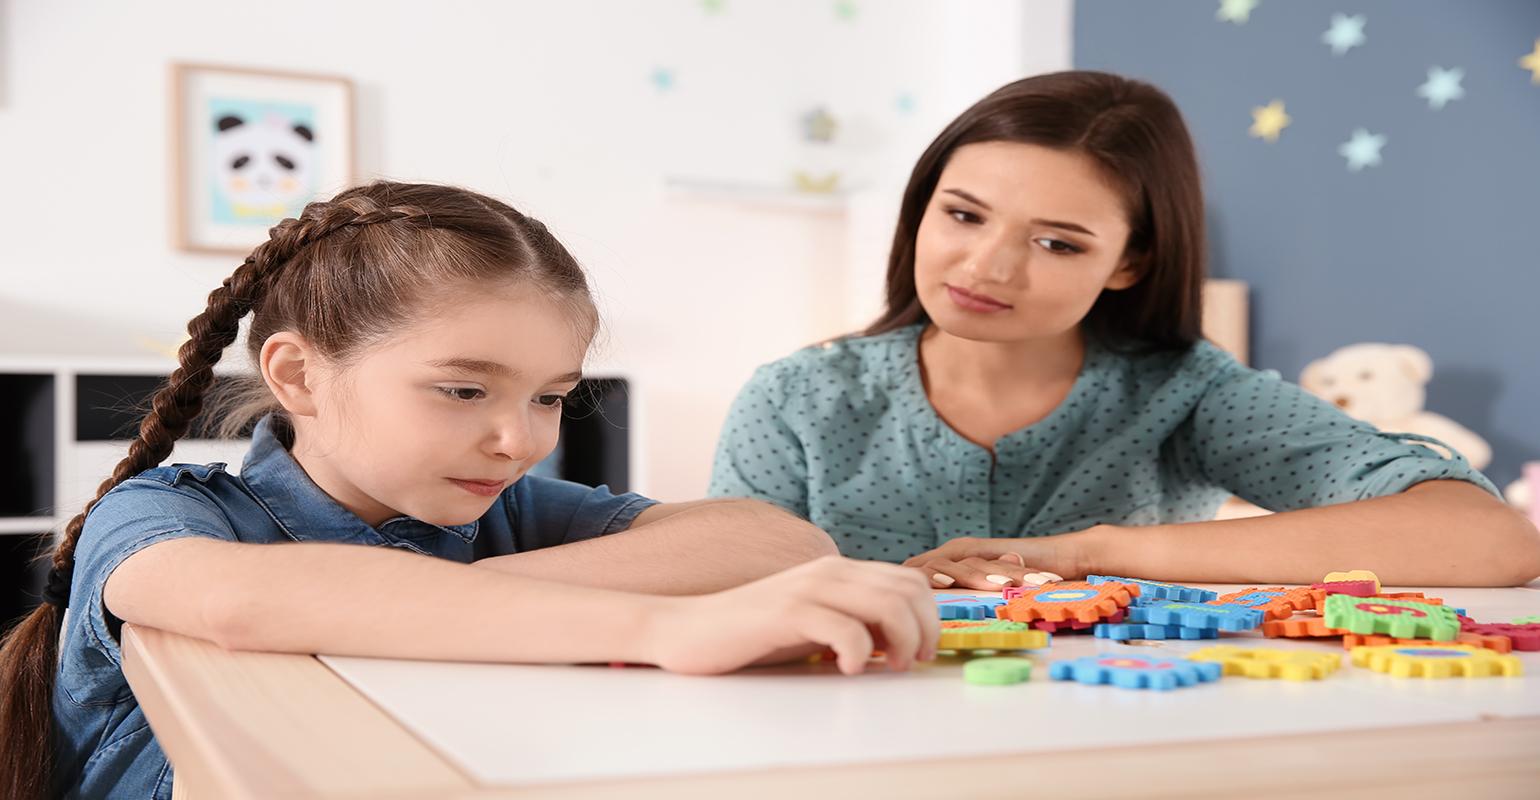 girls are diagnosed with autism at a later age